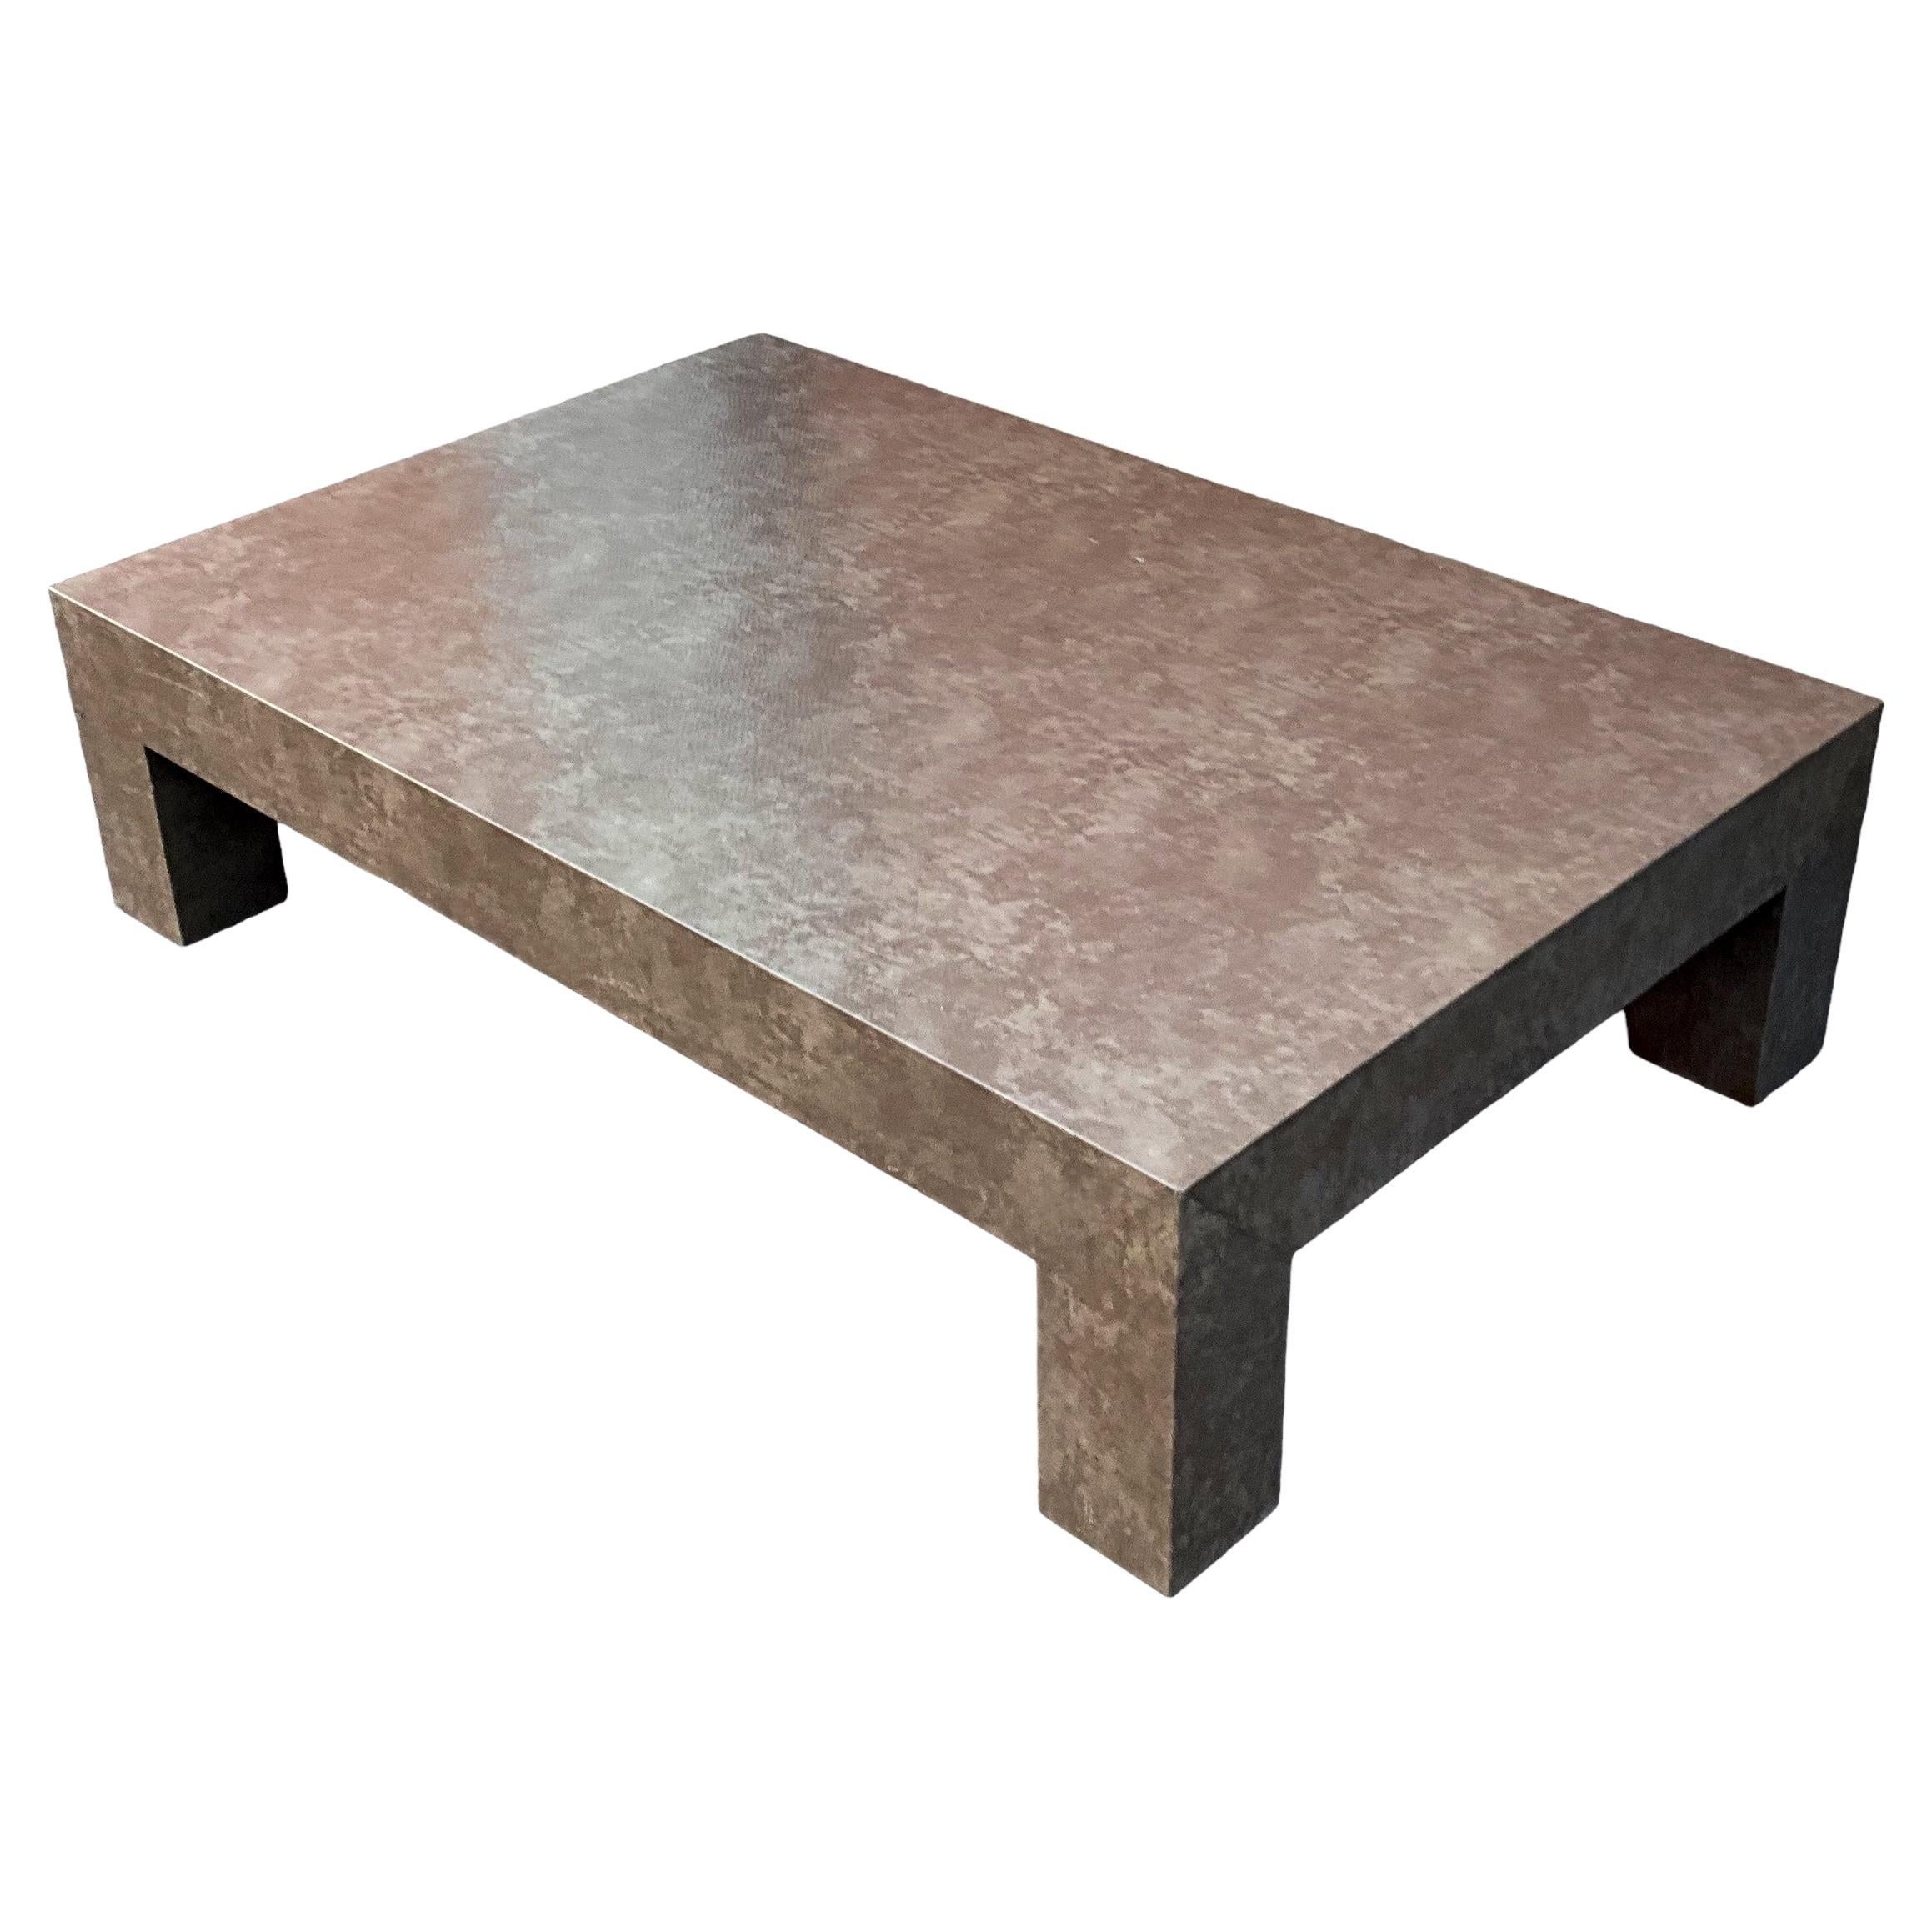 This is a large scale modern Parsons’ style low profile coffee table that has been wrapped in a faux snakeskin. The overall tone is a soothing taupe. It is unmarked and most likely dates to the 70s. 